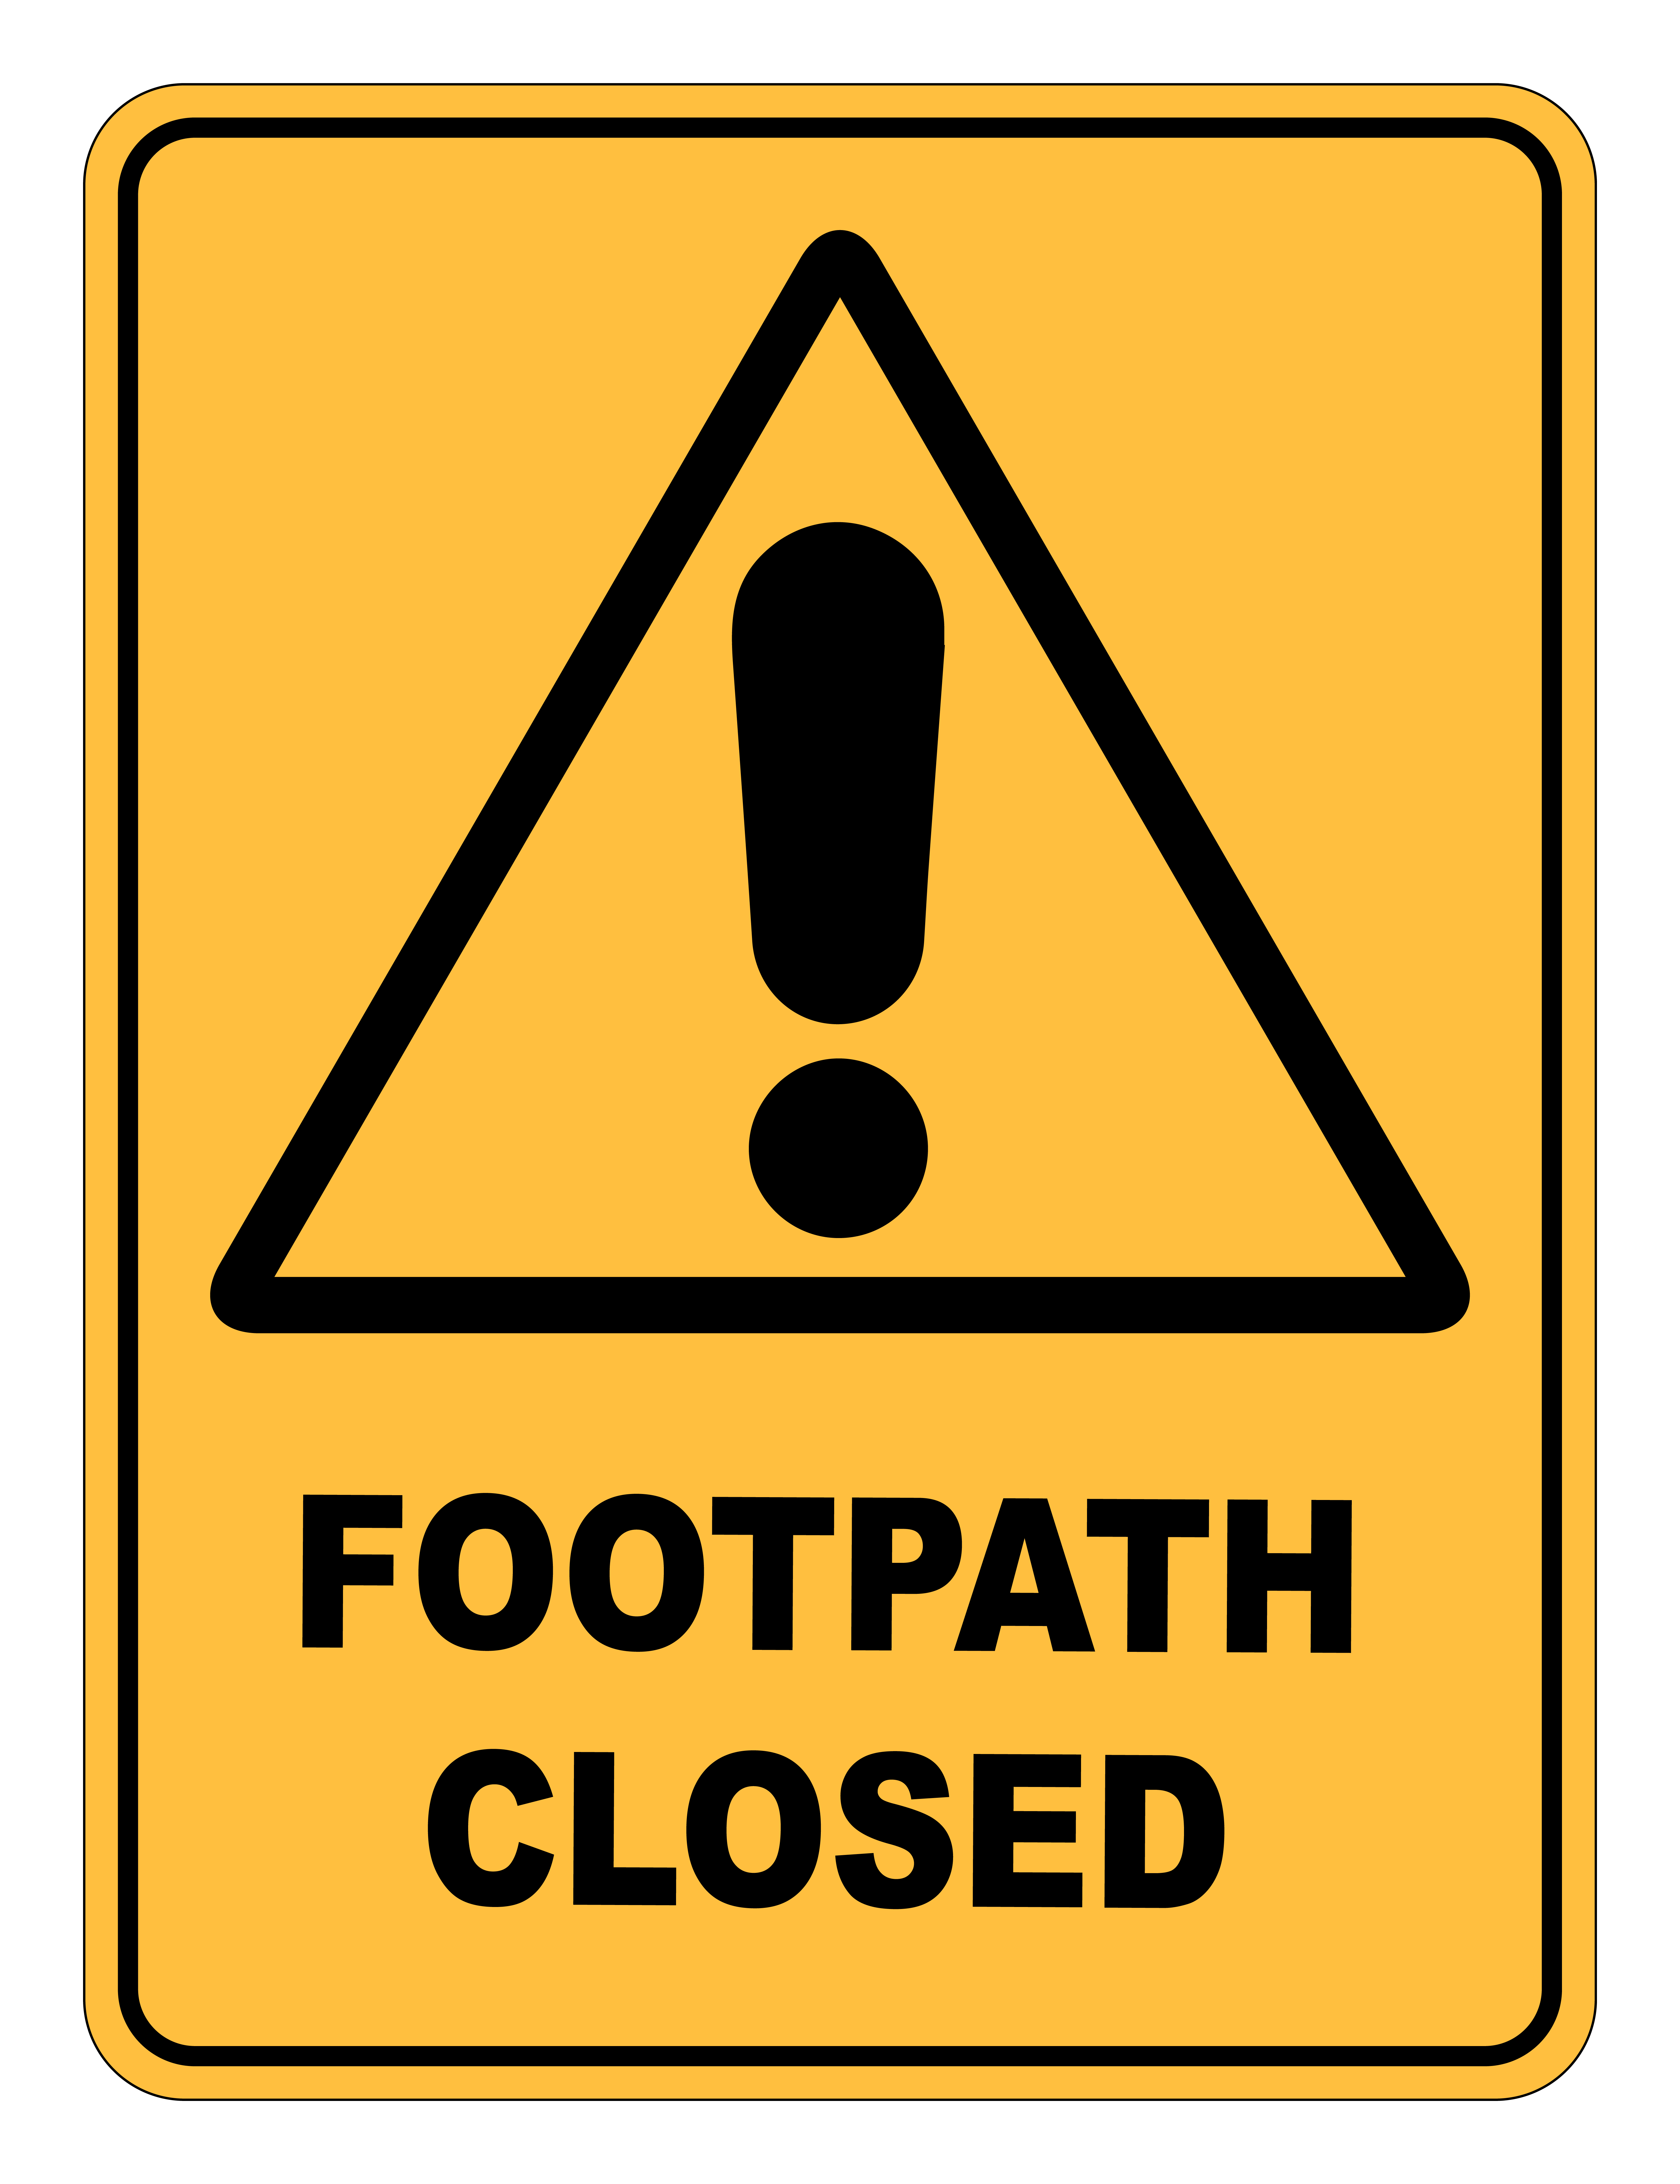 Footpath closed disease precautions safety sign 